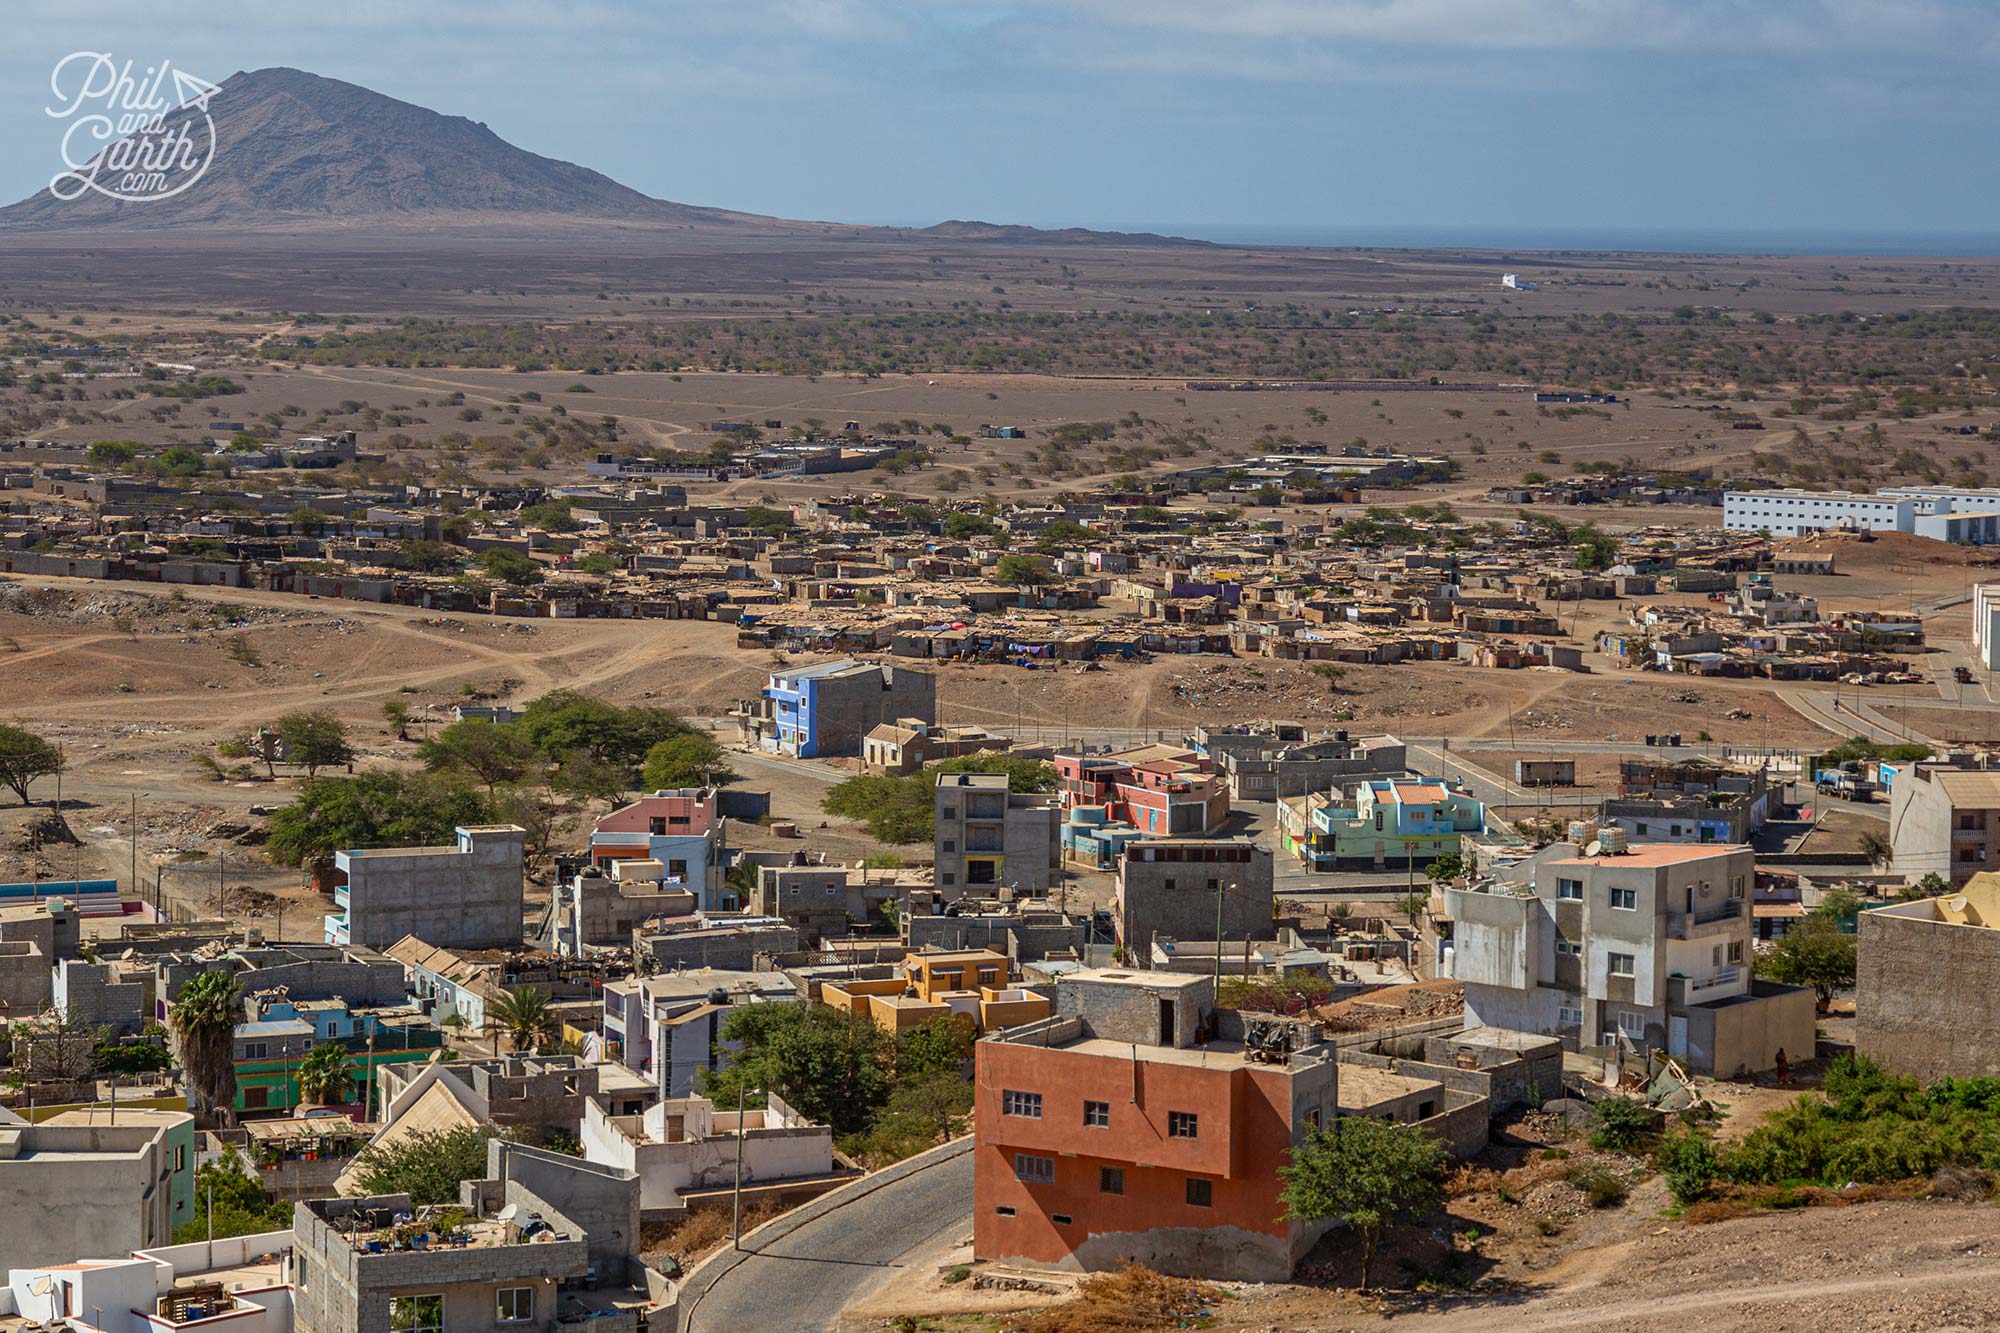 You'll also see the divide between rich and poor, with large shanty towns outside Espargos